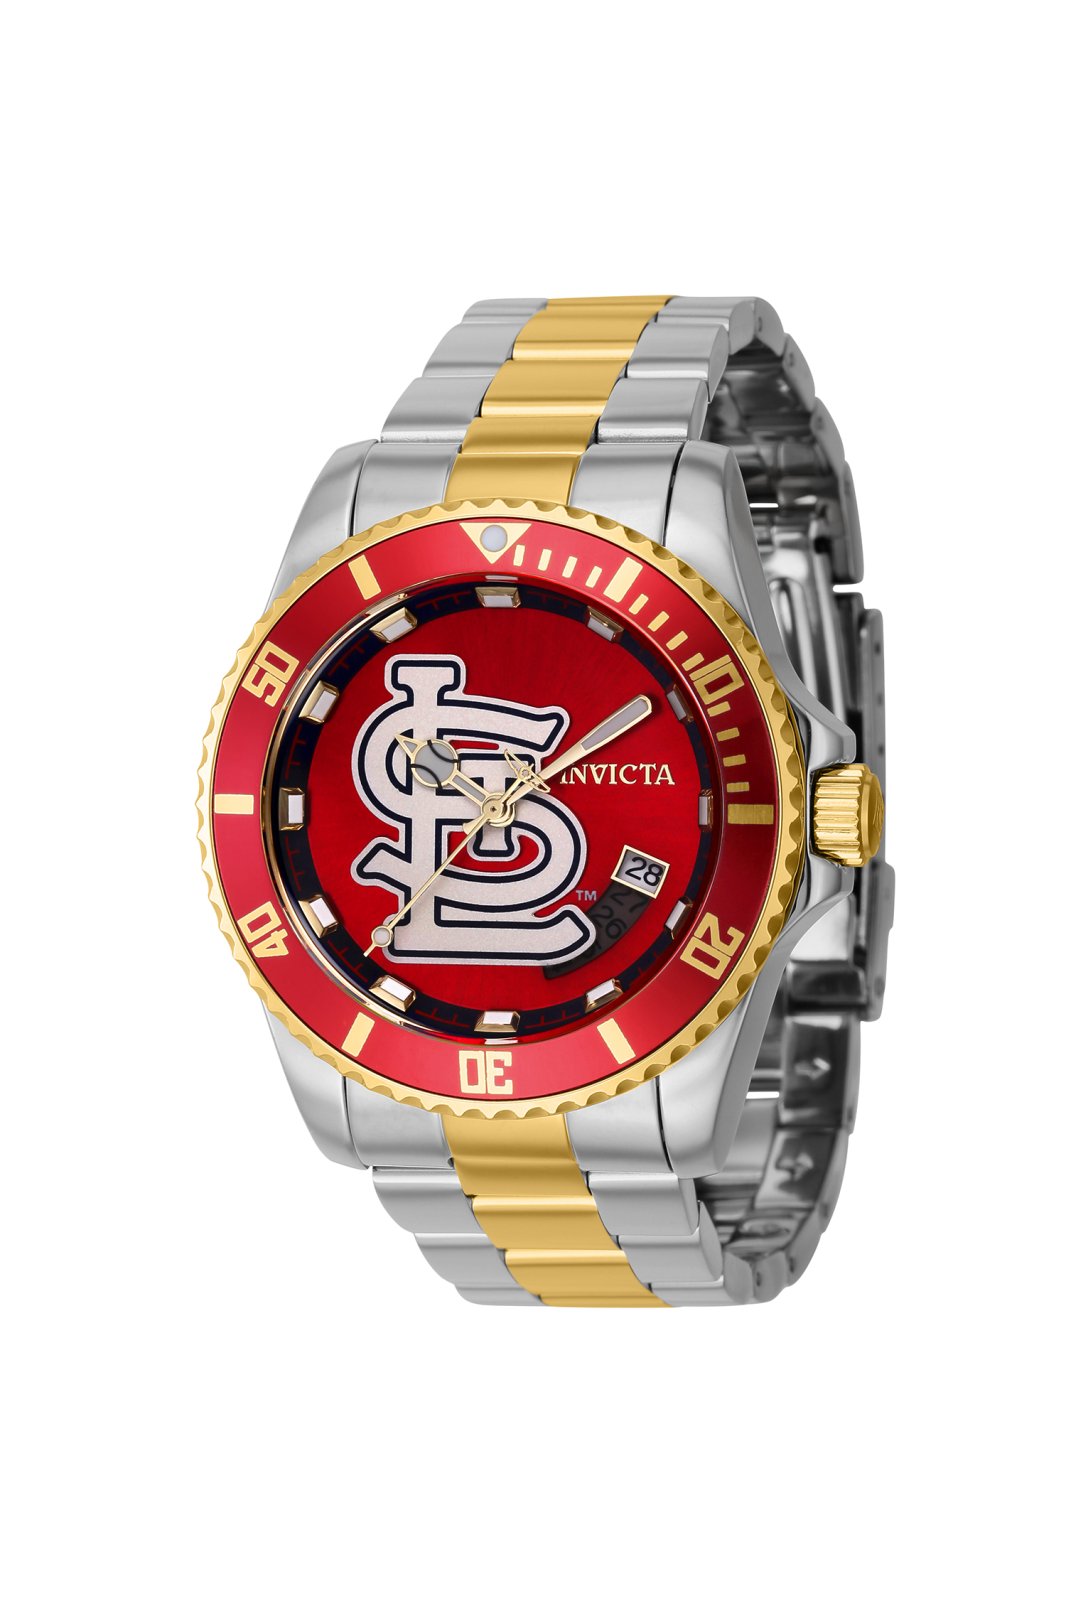 Invicta MLB - St. Louis Cardinals 42997 Men's Automatic Watch - 42mm